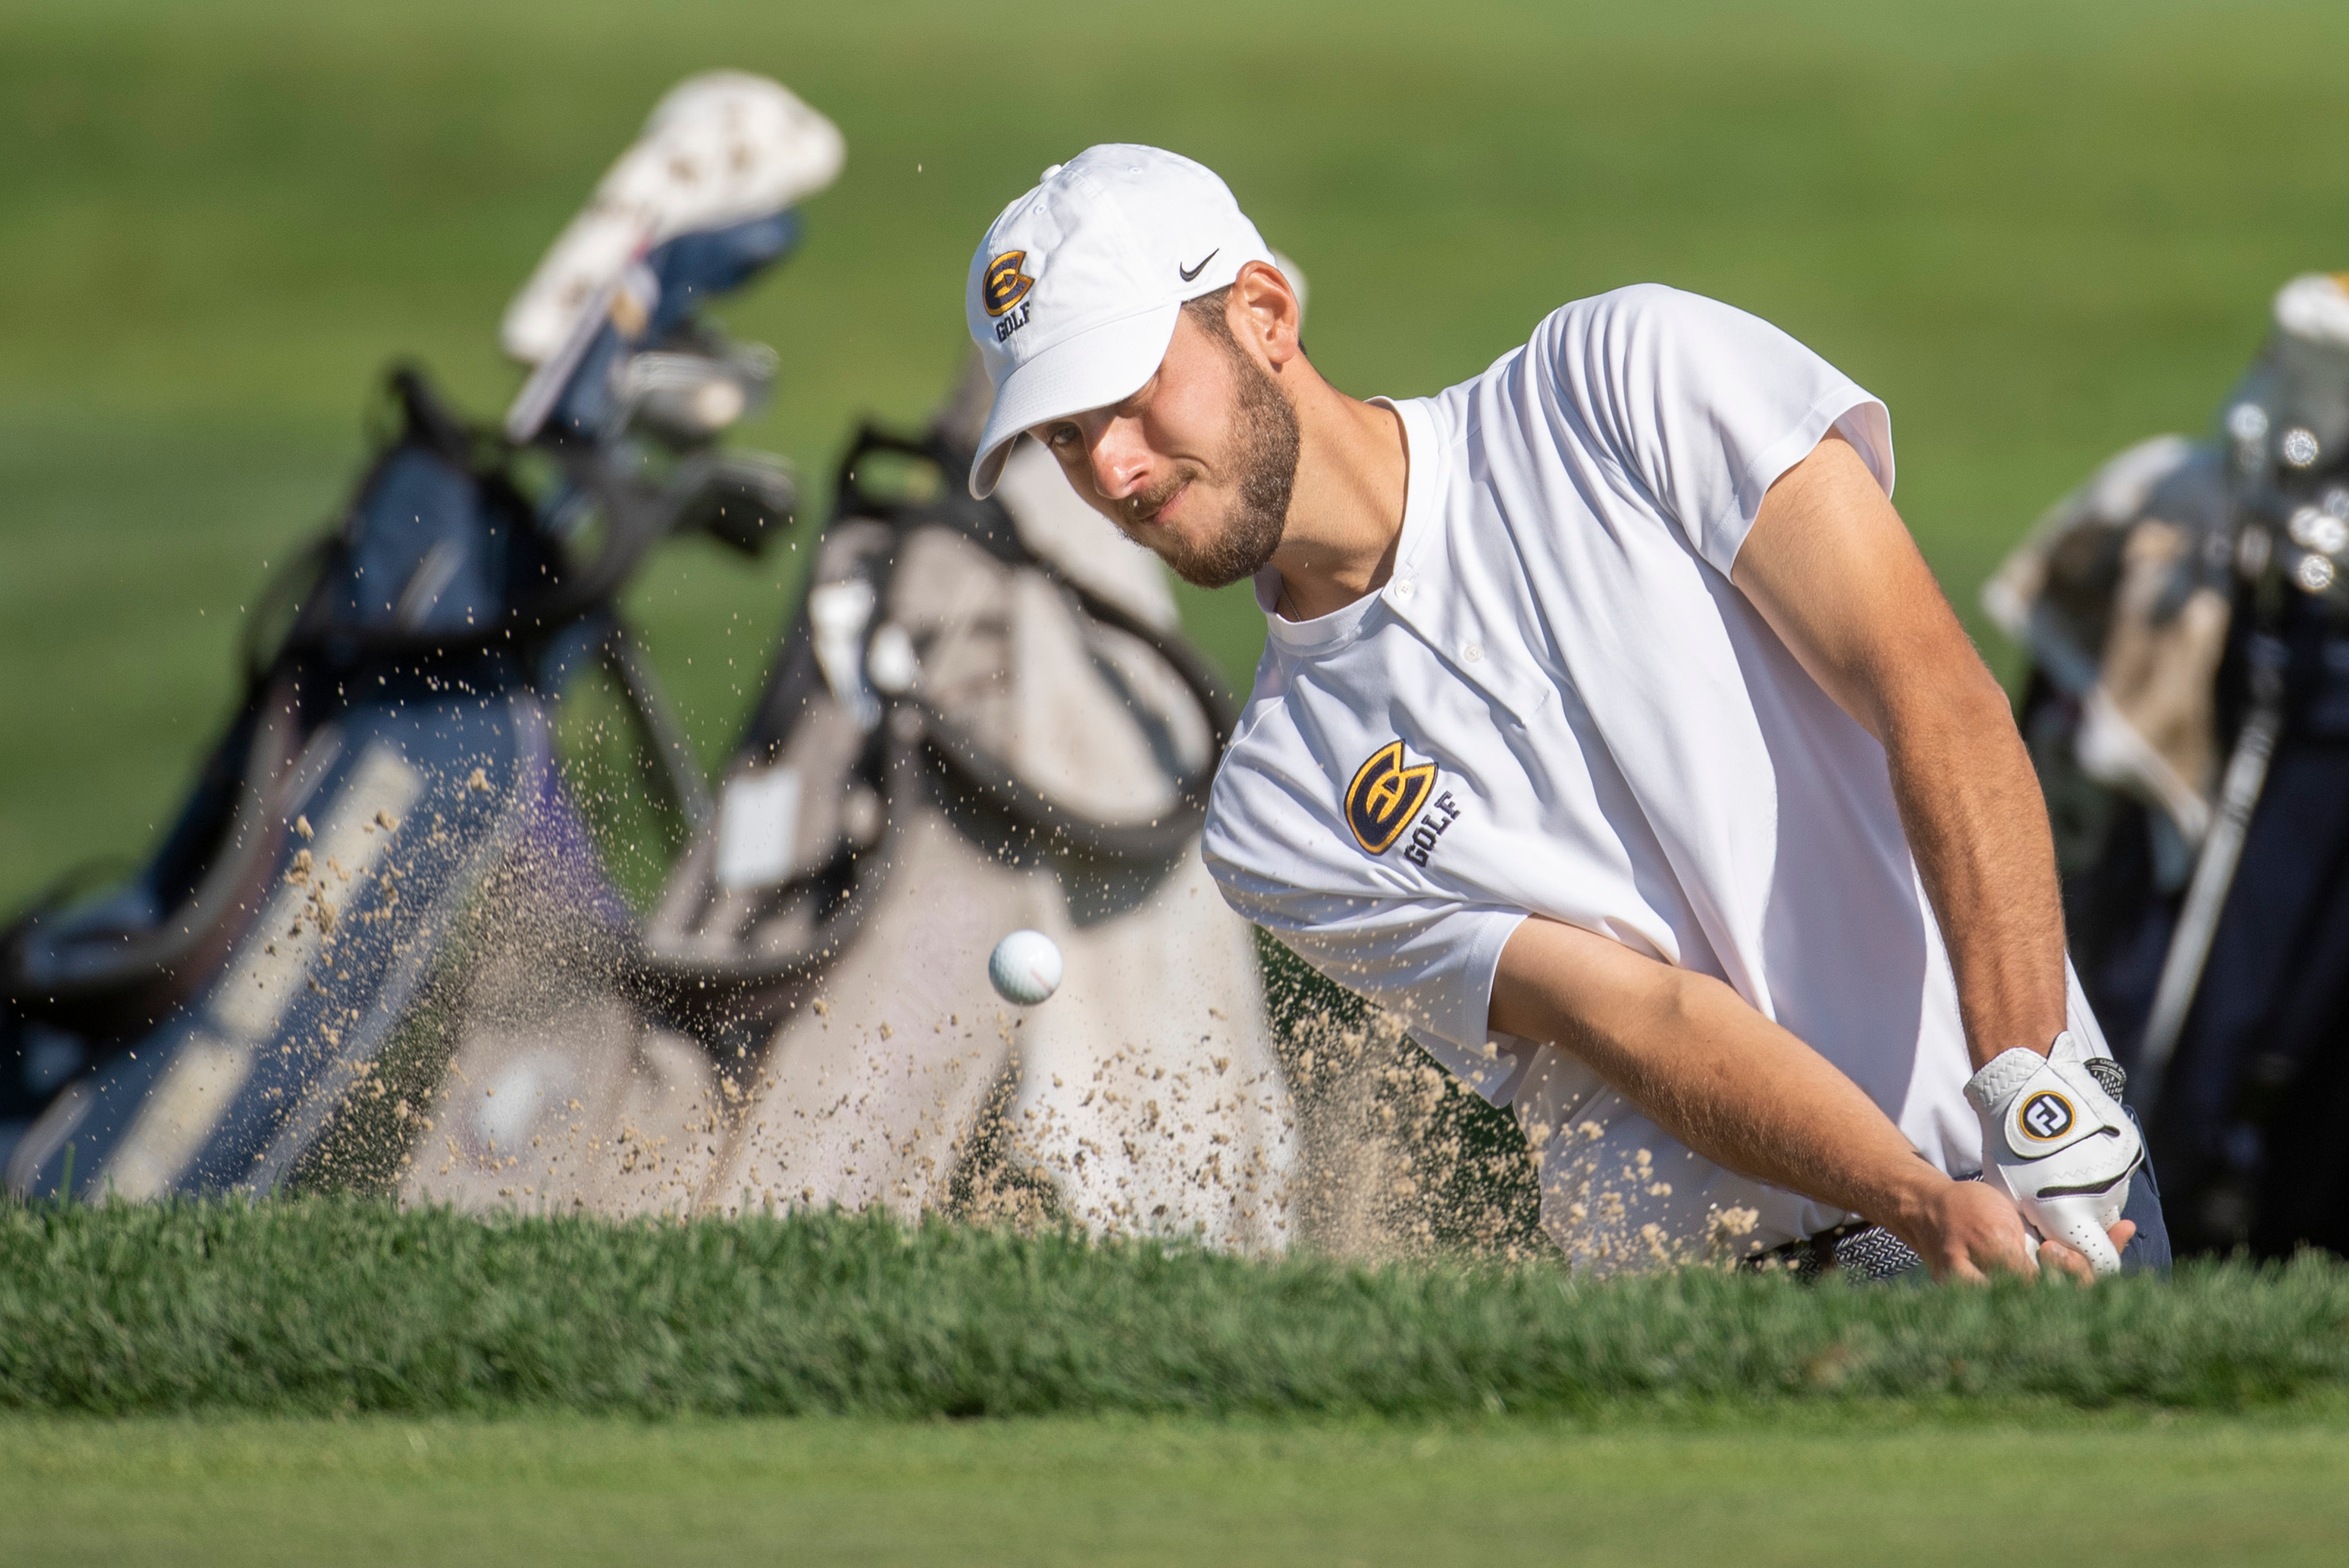 Blugolds Sit in First Place After Day 1 at UW-Stout Invite